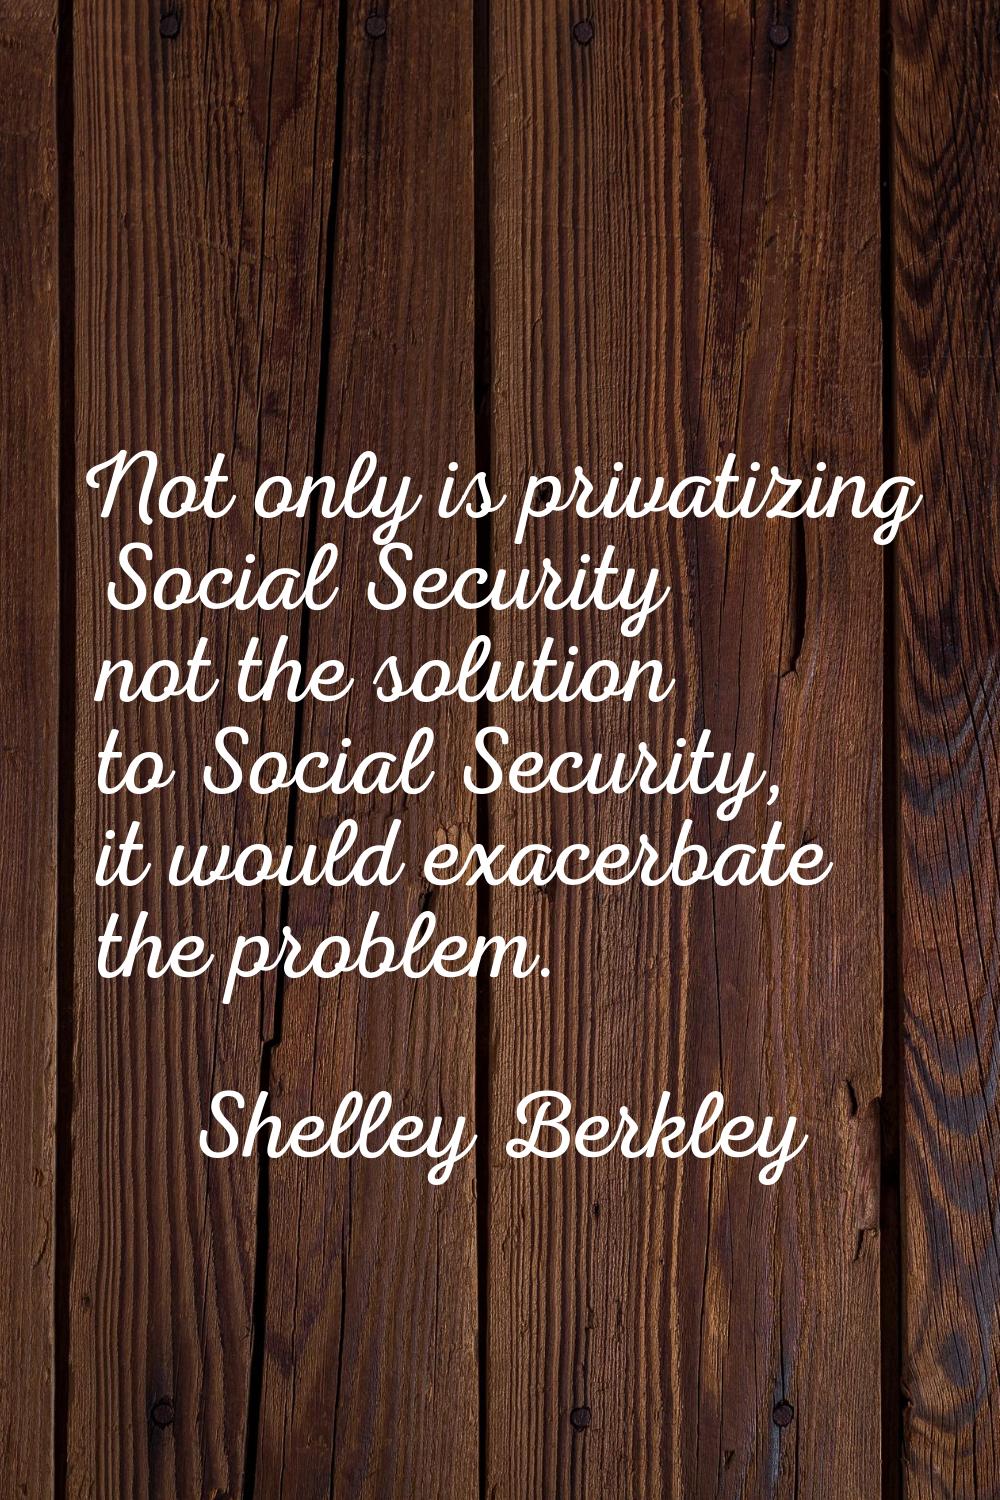 Not only is privatizing Social Security not the solution to Social Security, it would exacerbate th